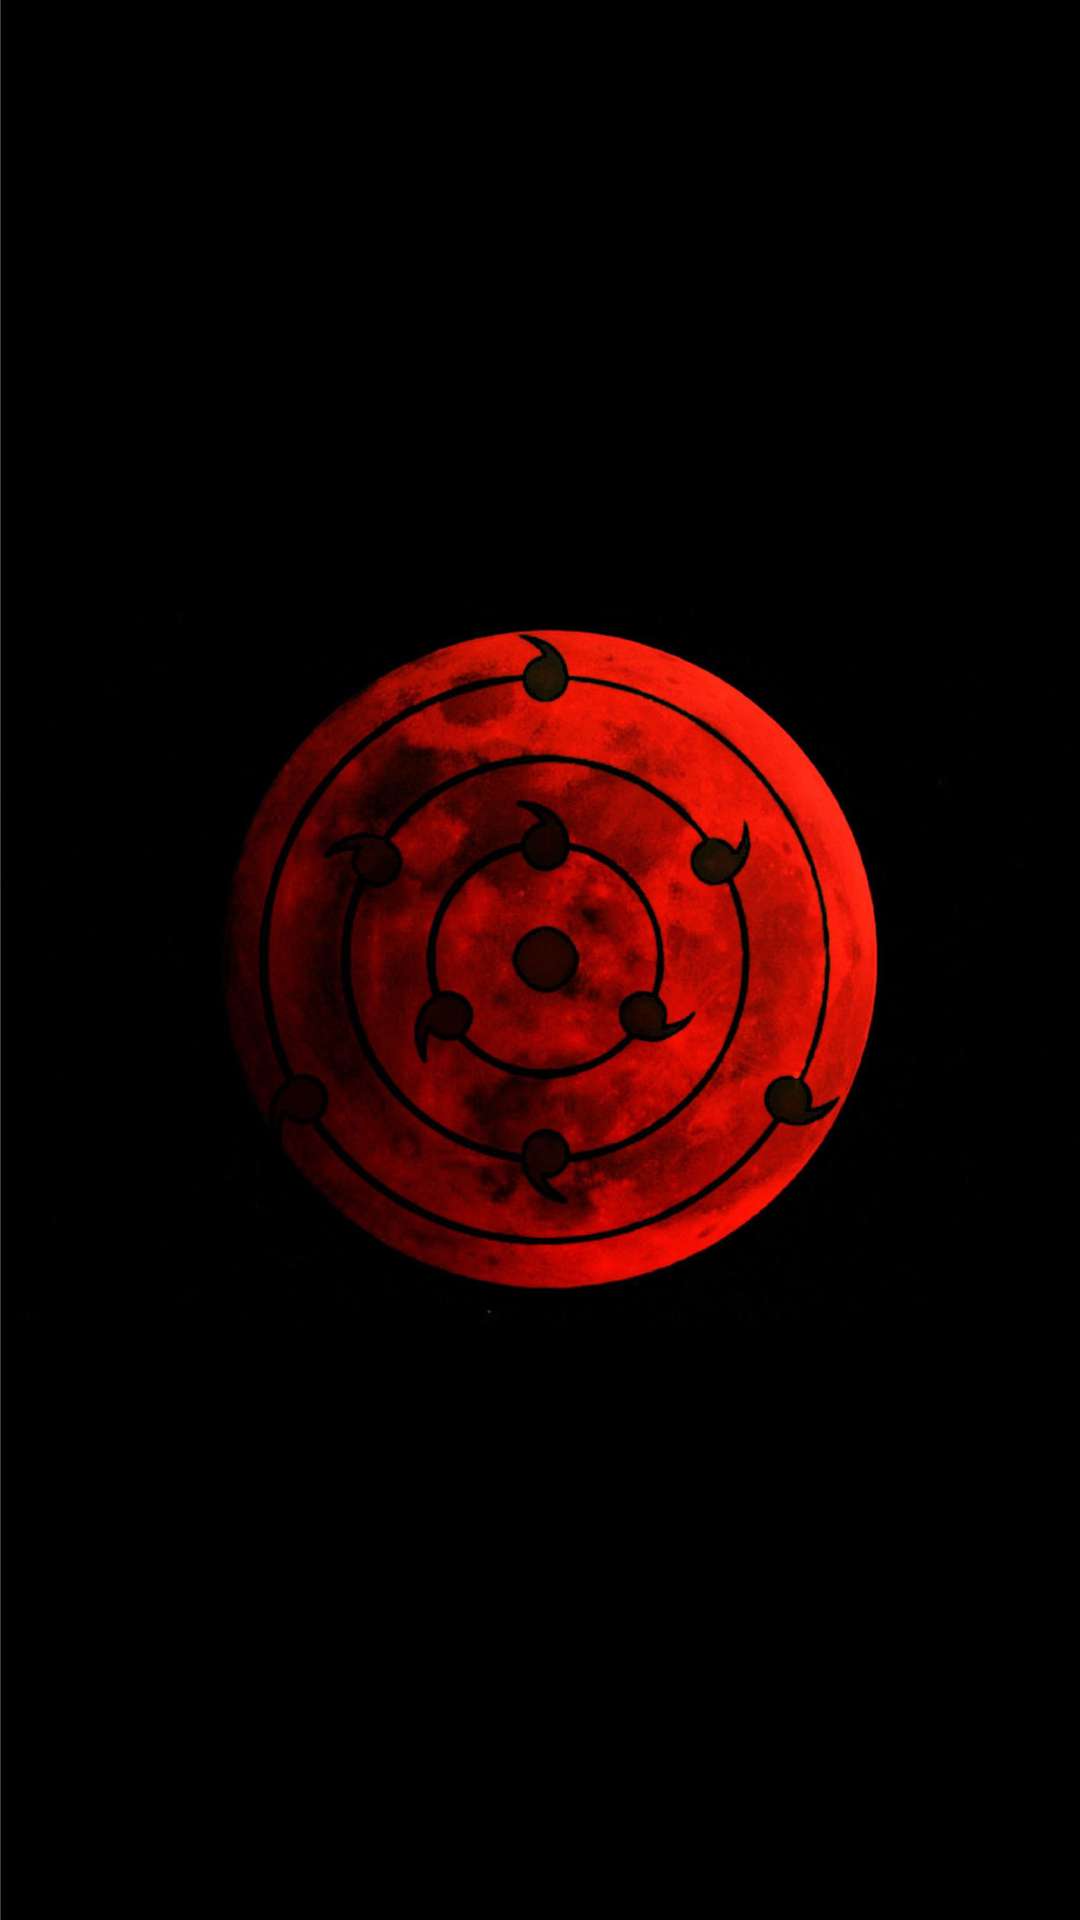 Sharingan Wallpapers for PC - How to Install on Windows PC, Mac